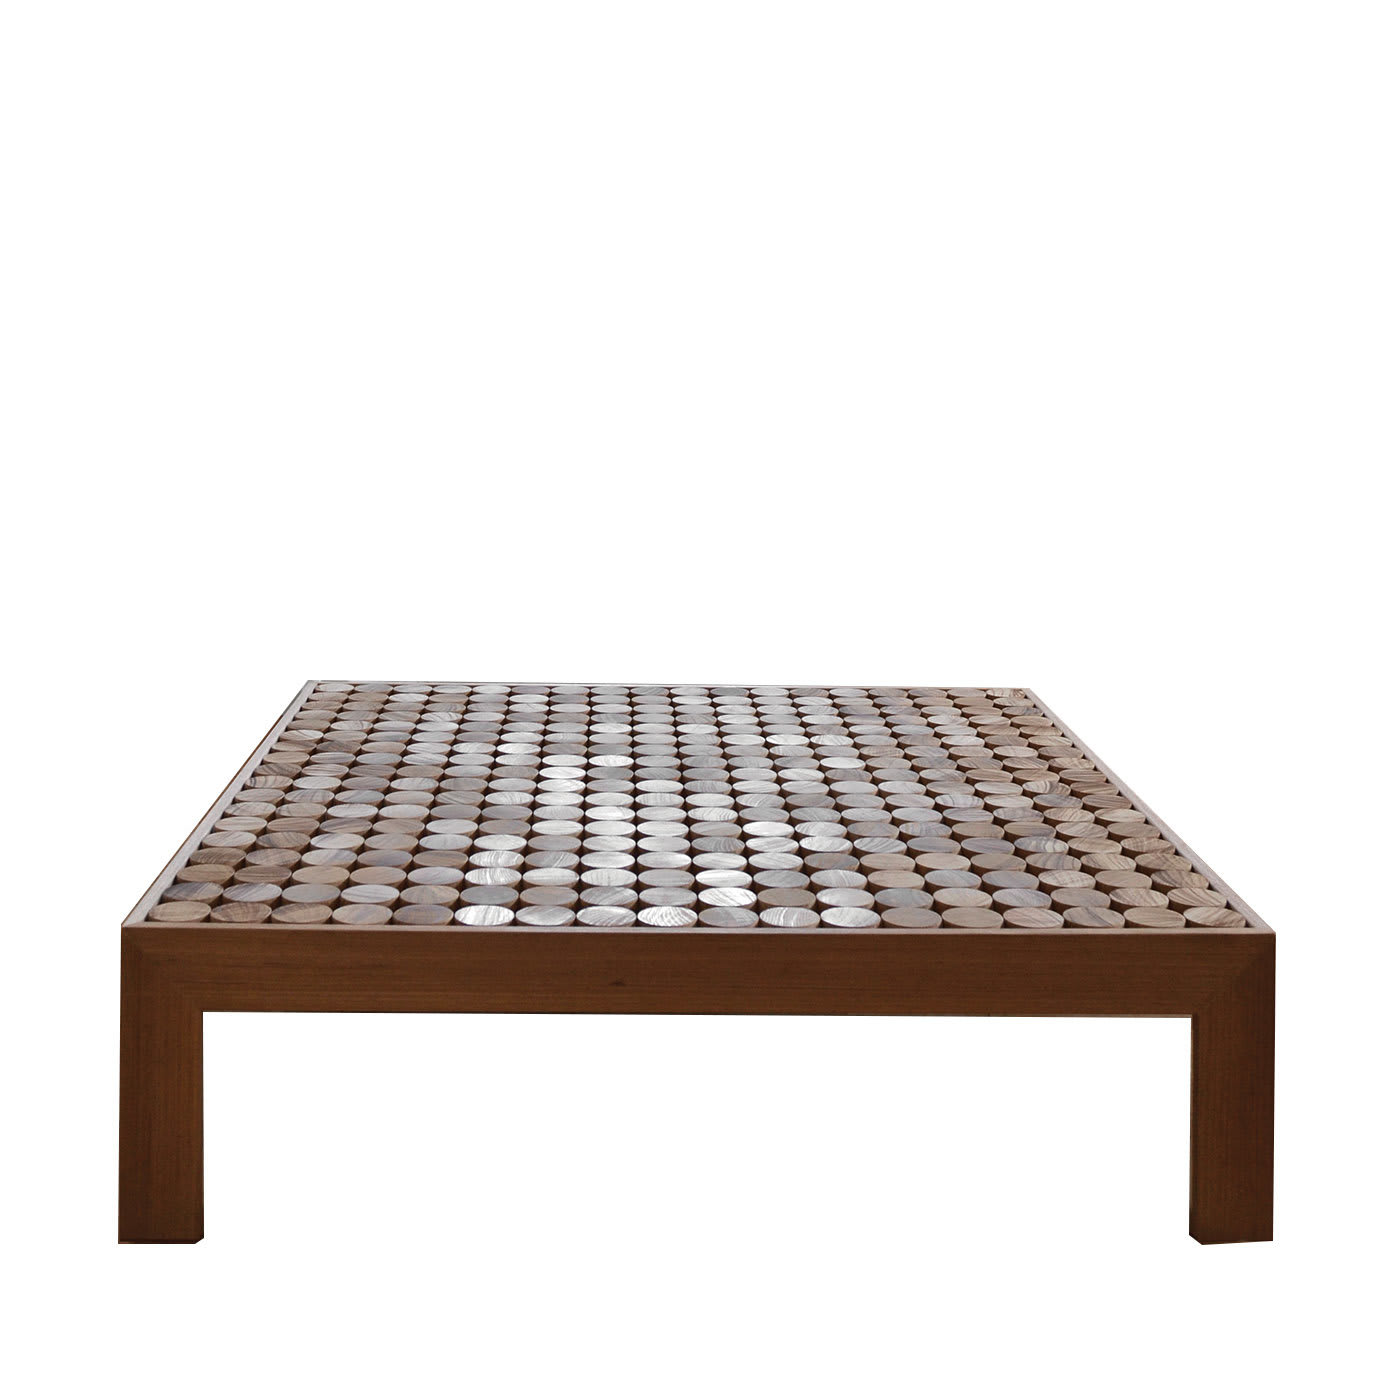 Sofia Coffee Table in Solid Wood - Mg12 by Monica Geronimi